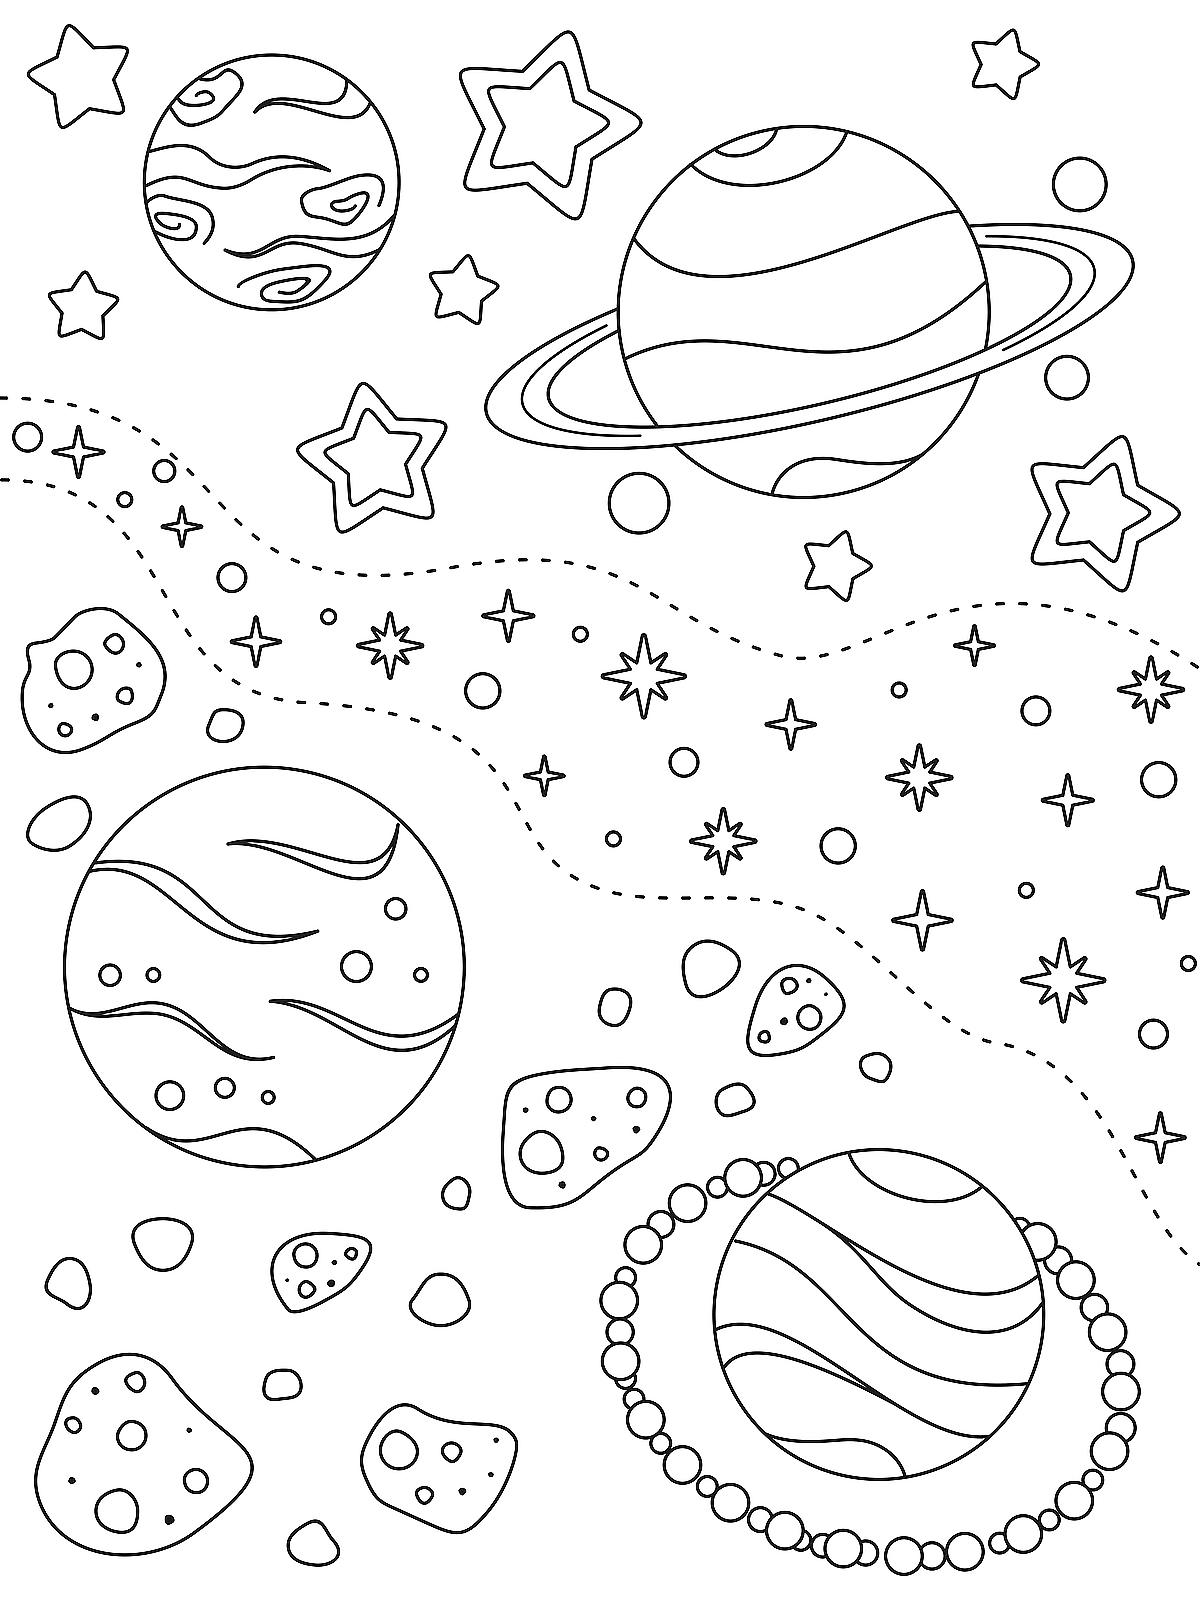 outer-space-coloring-page-for-kids-fun-free-printable-coloring-page-that-are-out-of-this